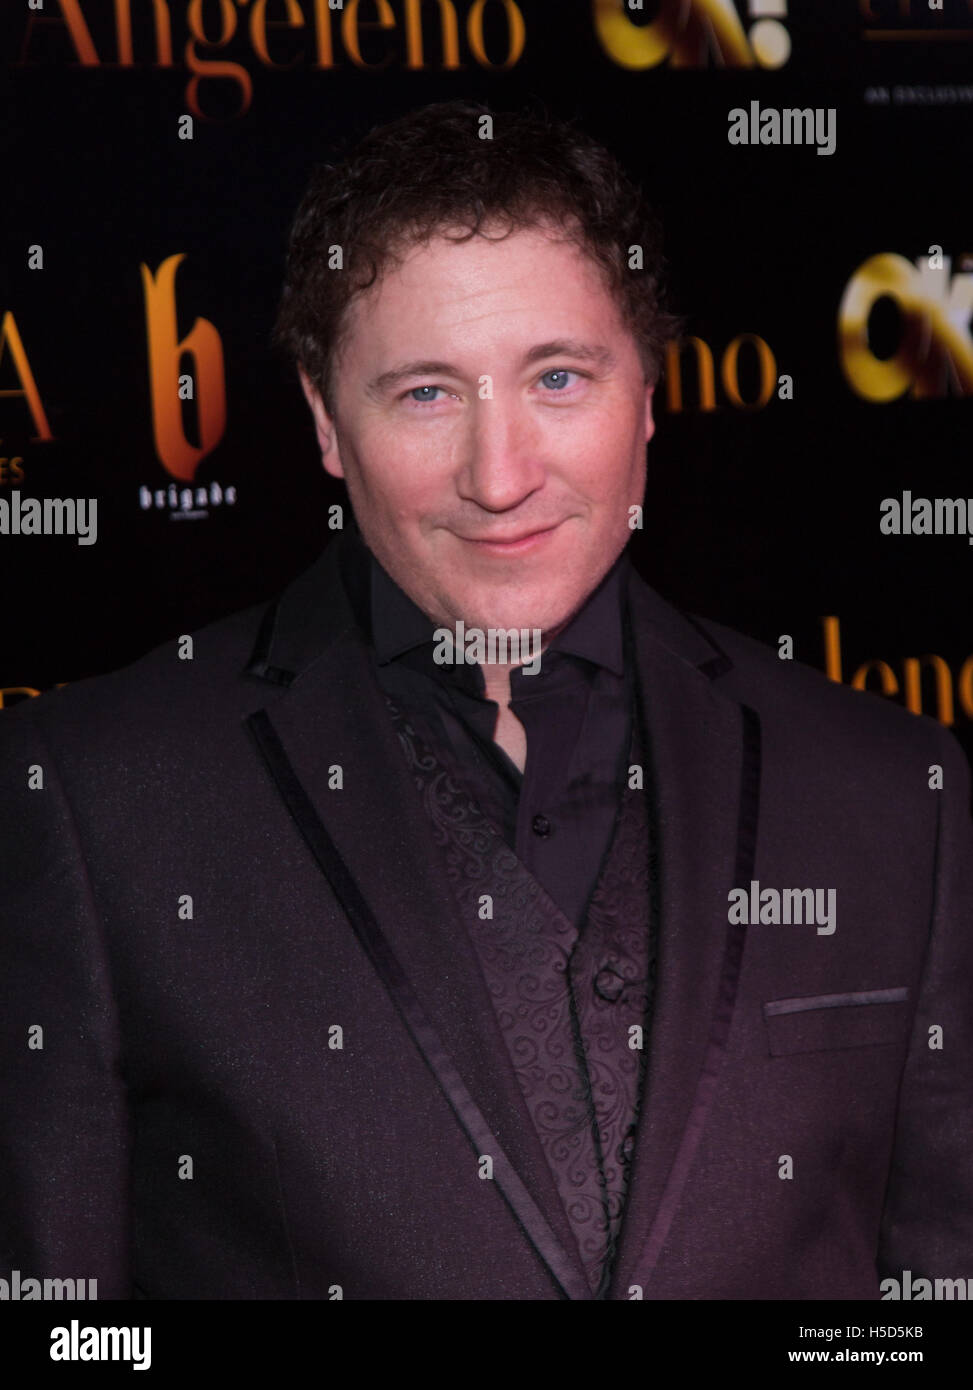 Michael Raven attends the 2016 City Gala Fundraiser at The Playboy Mansion on February 15, 2016 in Los Angeles, California. Stock Photo